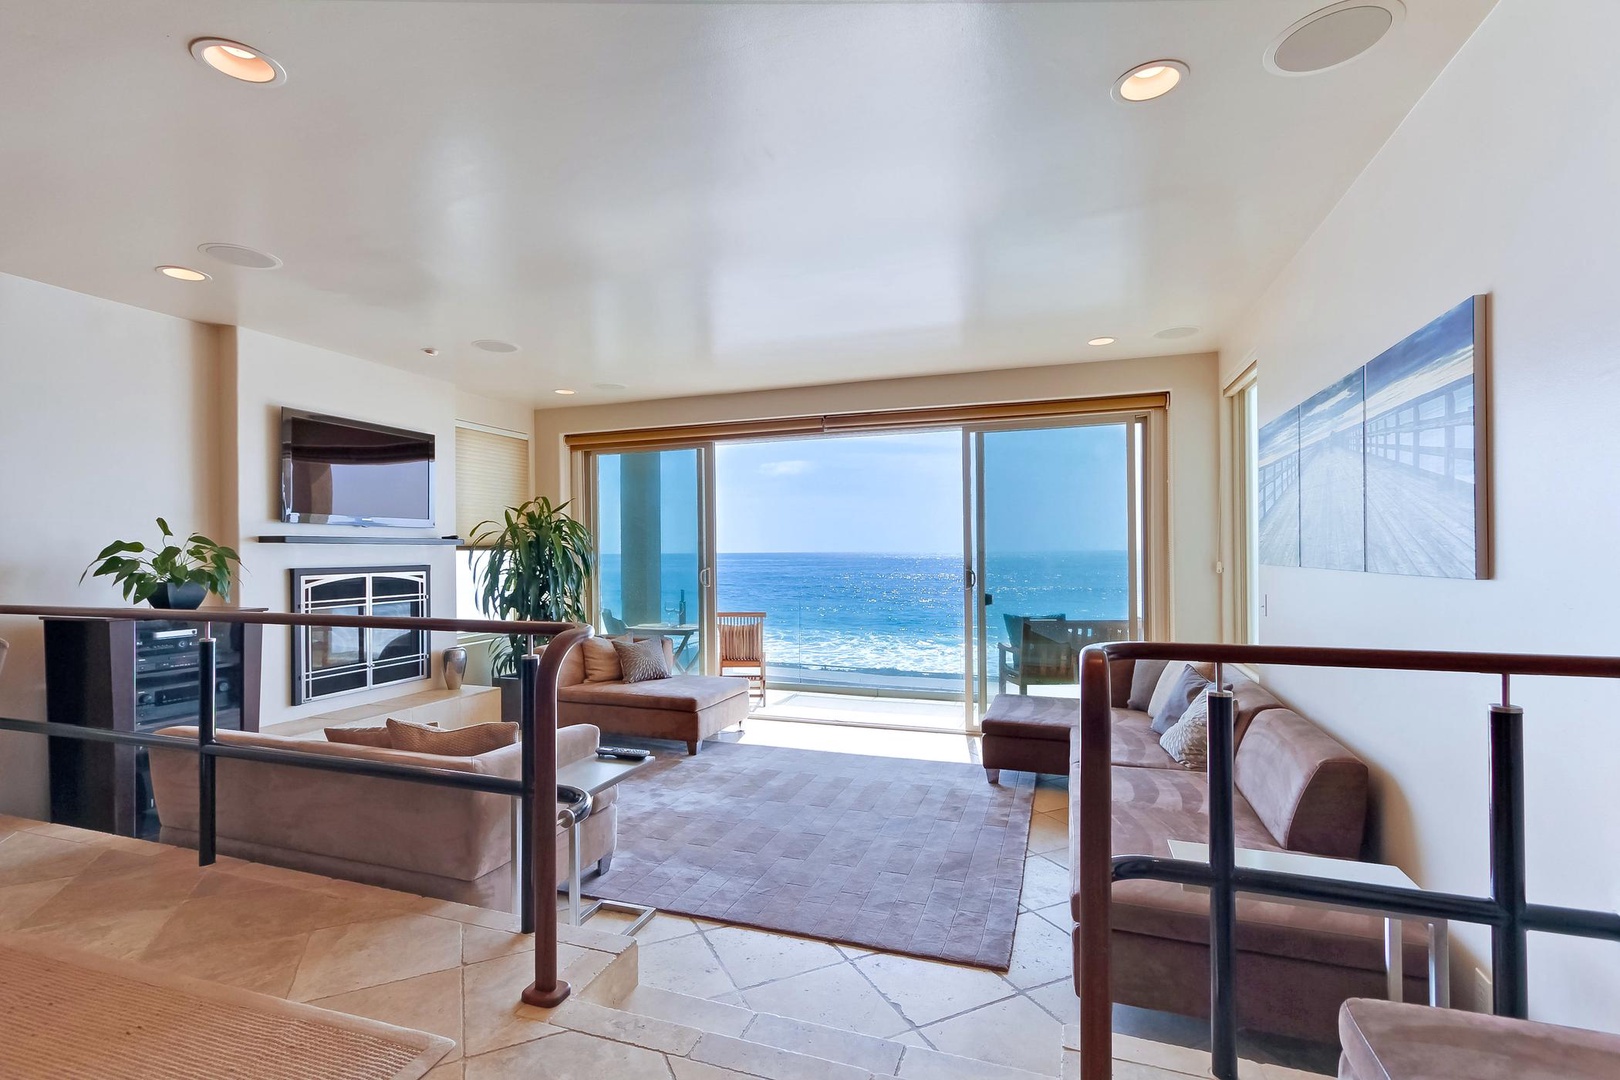 Ocean views from the living room